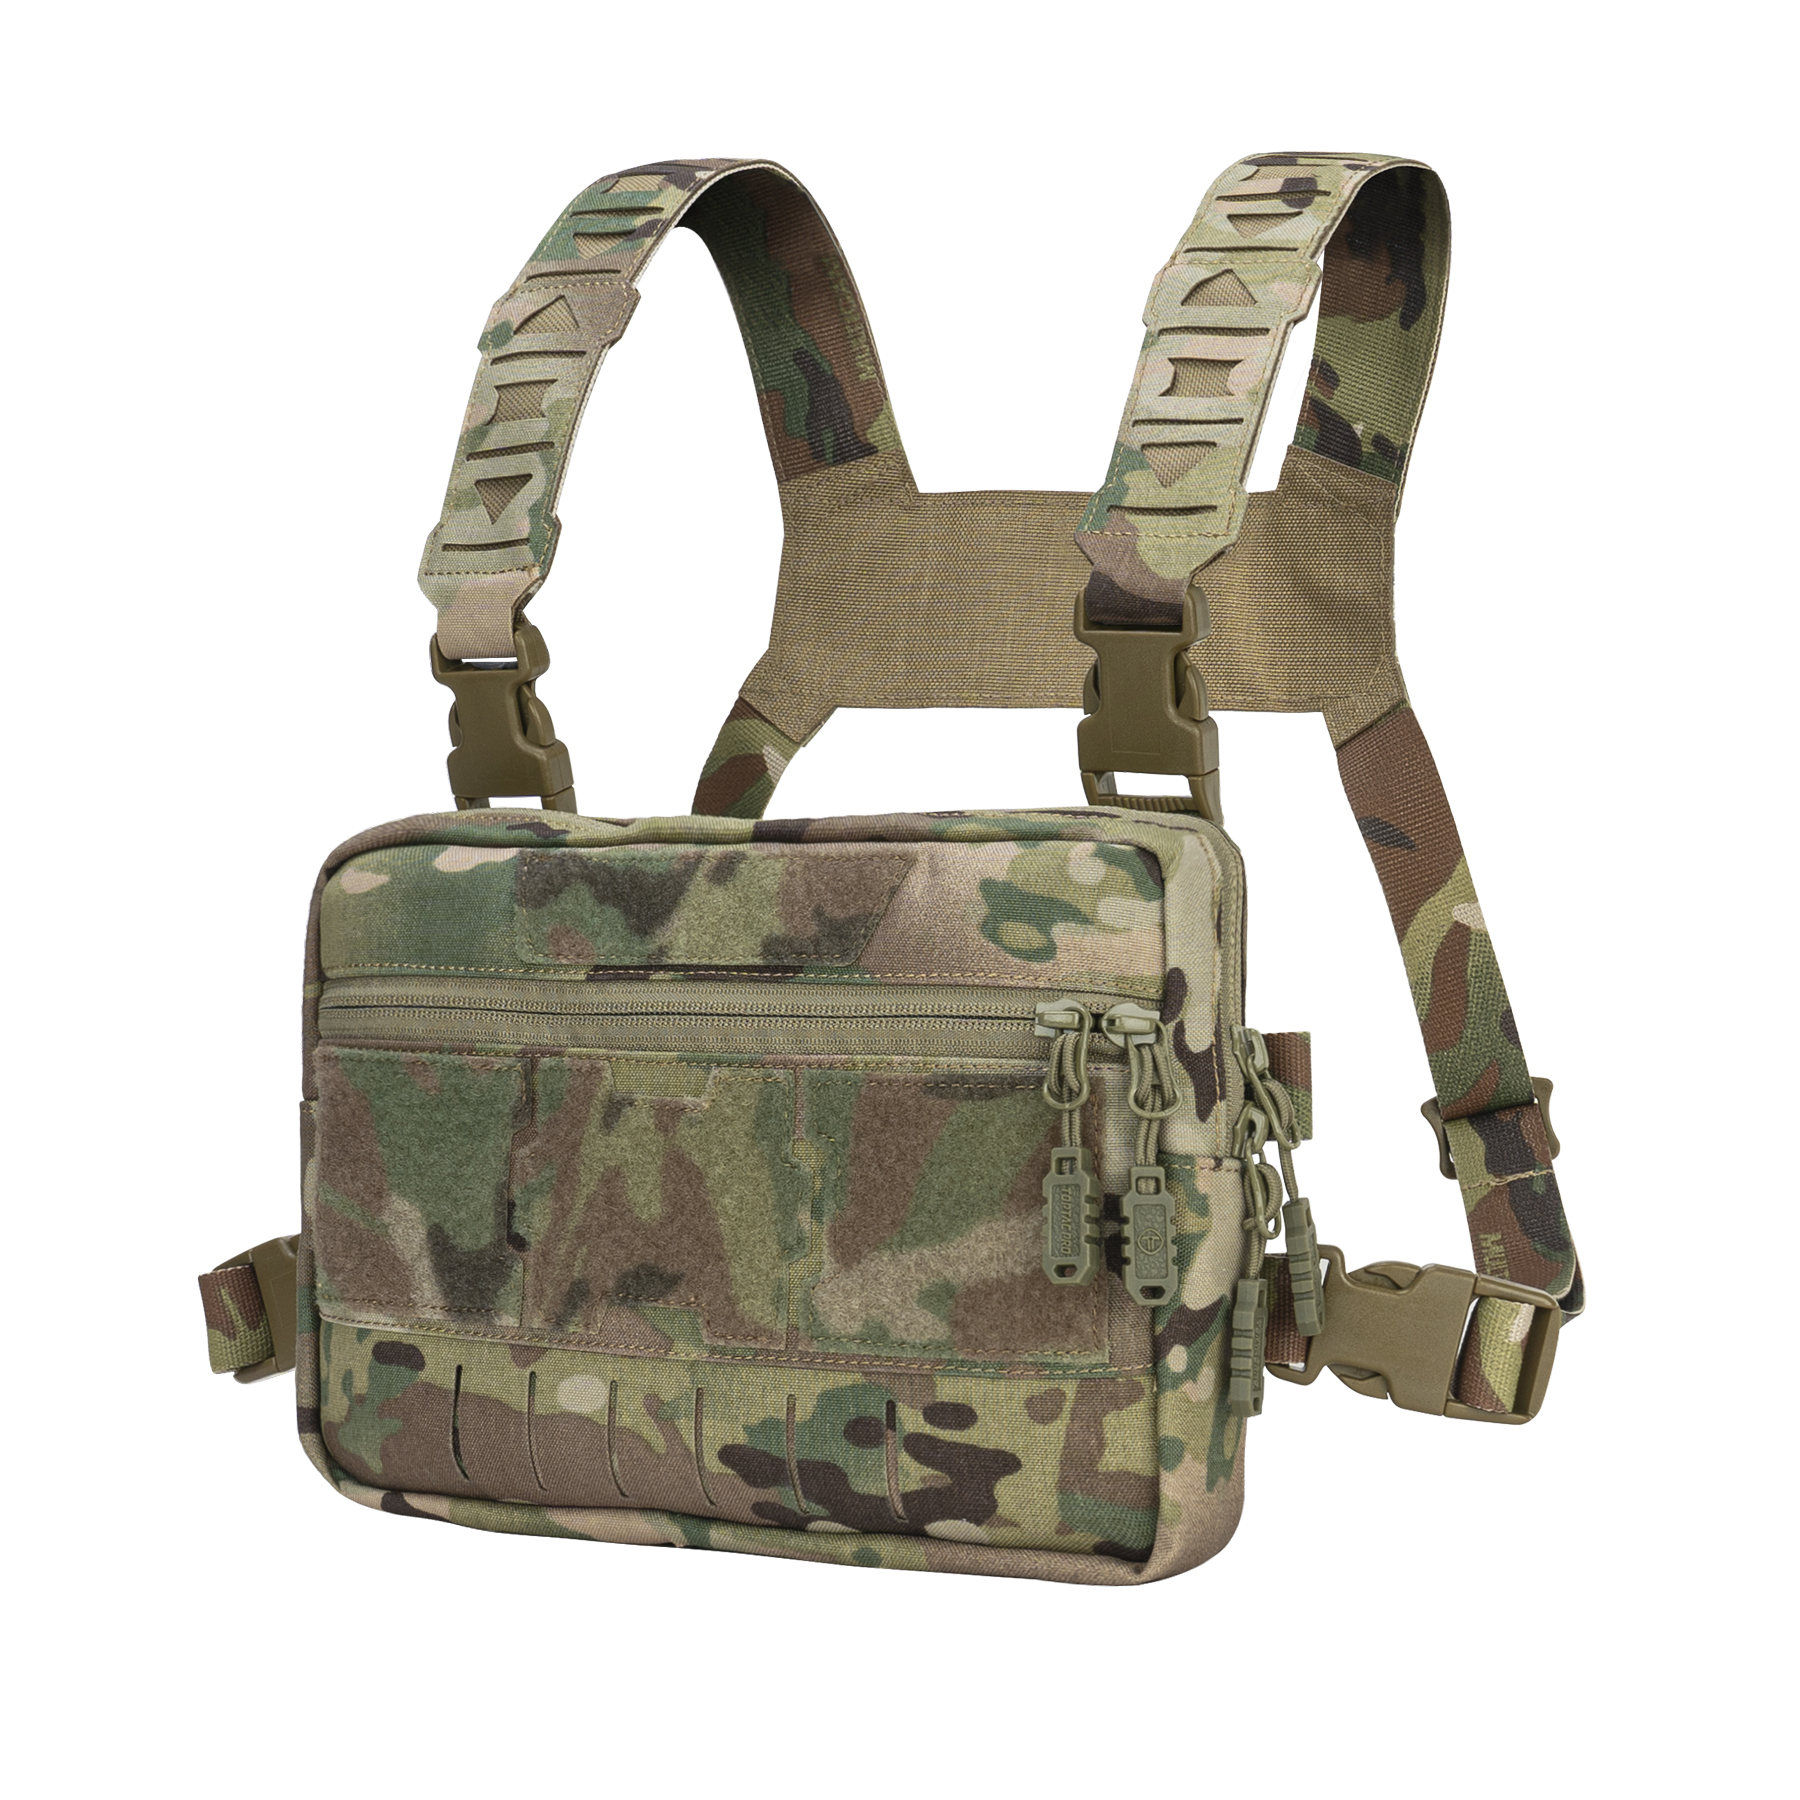 Kyrio Tactical Chest Rig Molle Chest Rig Bag Airsoft Chest Rig